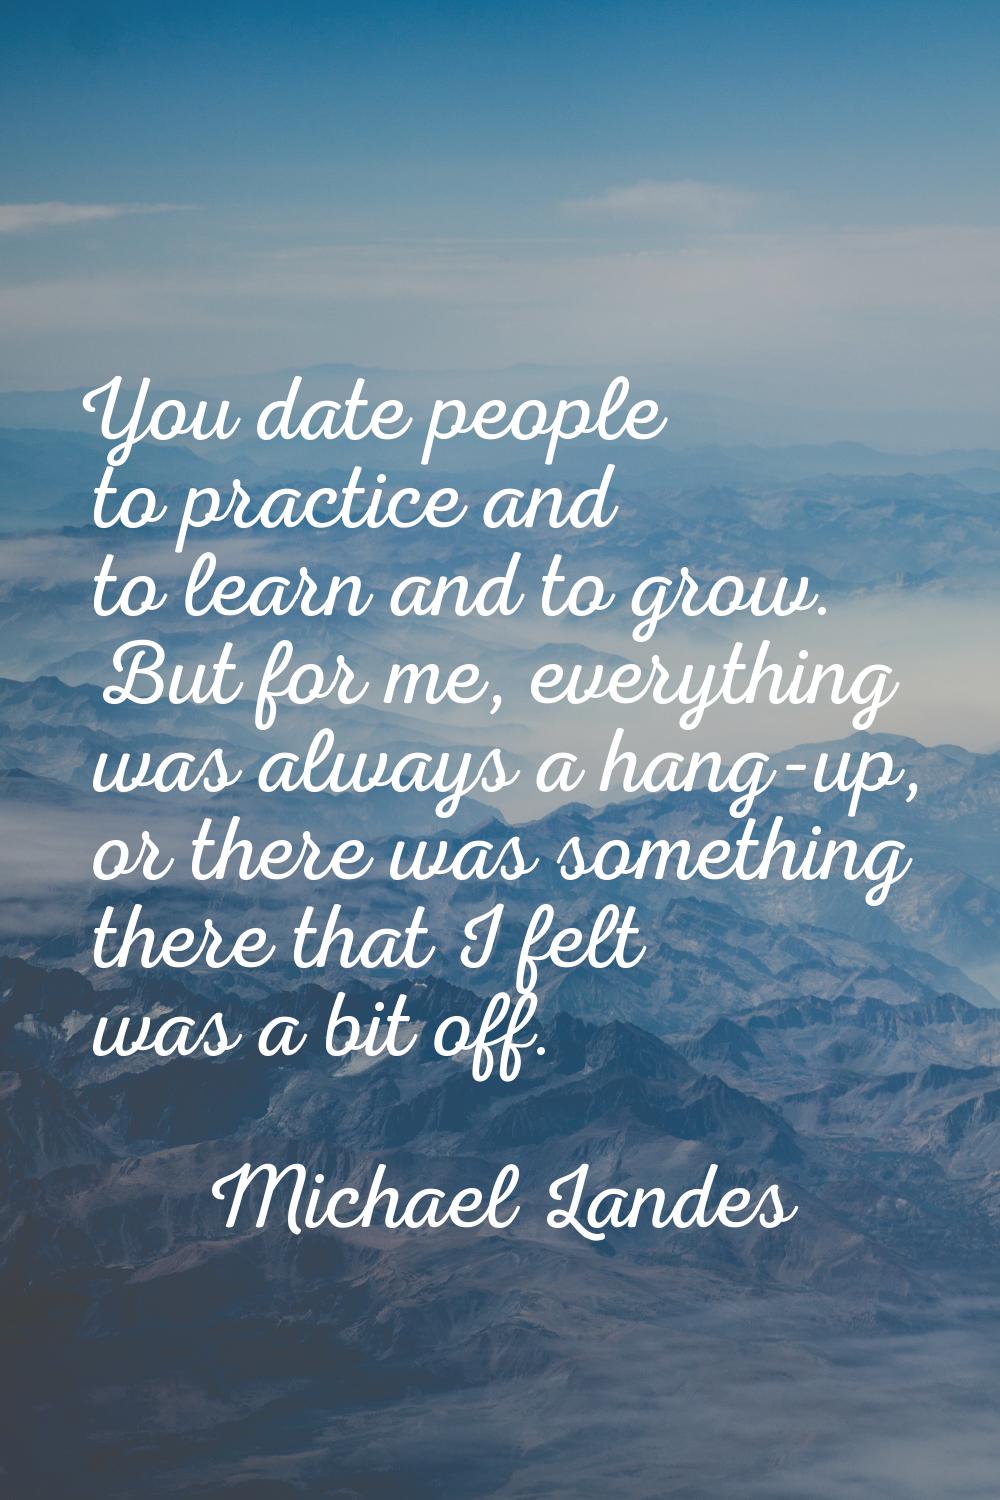 You date people to practice and to learn and to grow. But for me, everything was always a hang-up, 